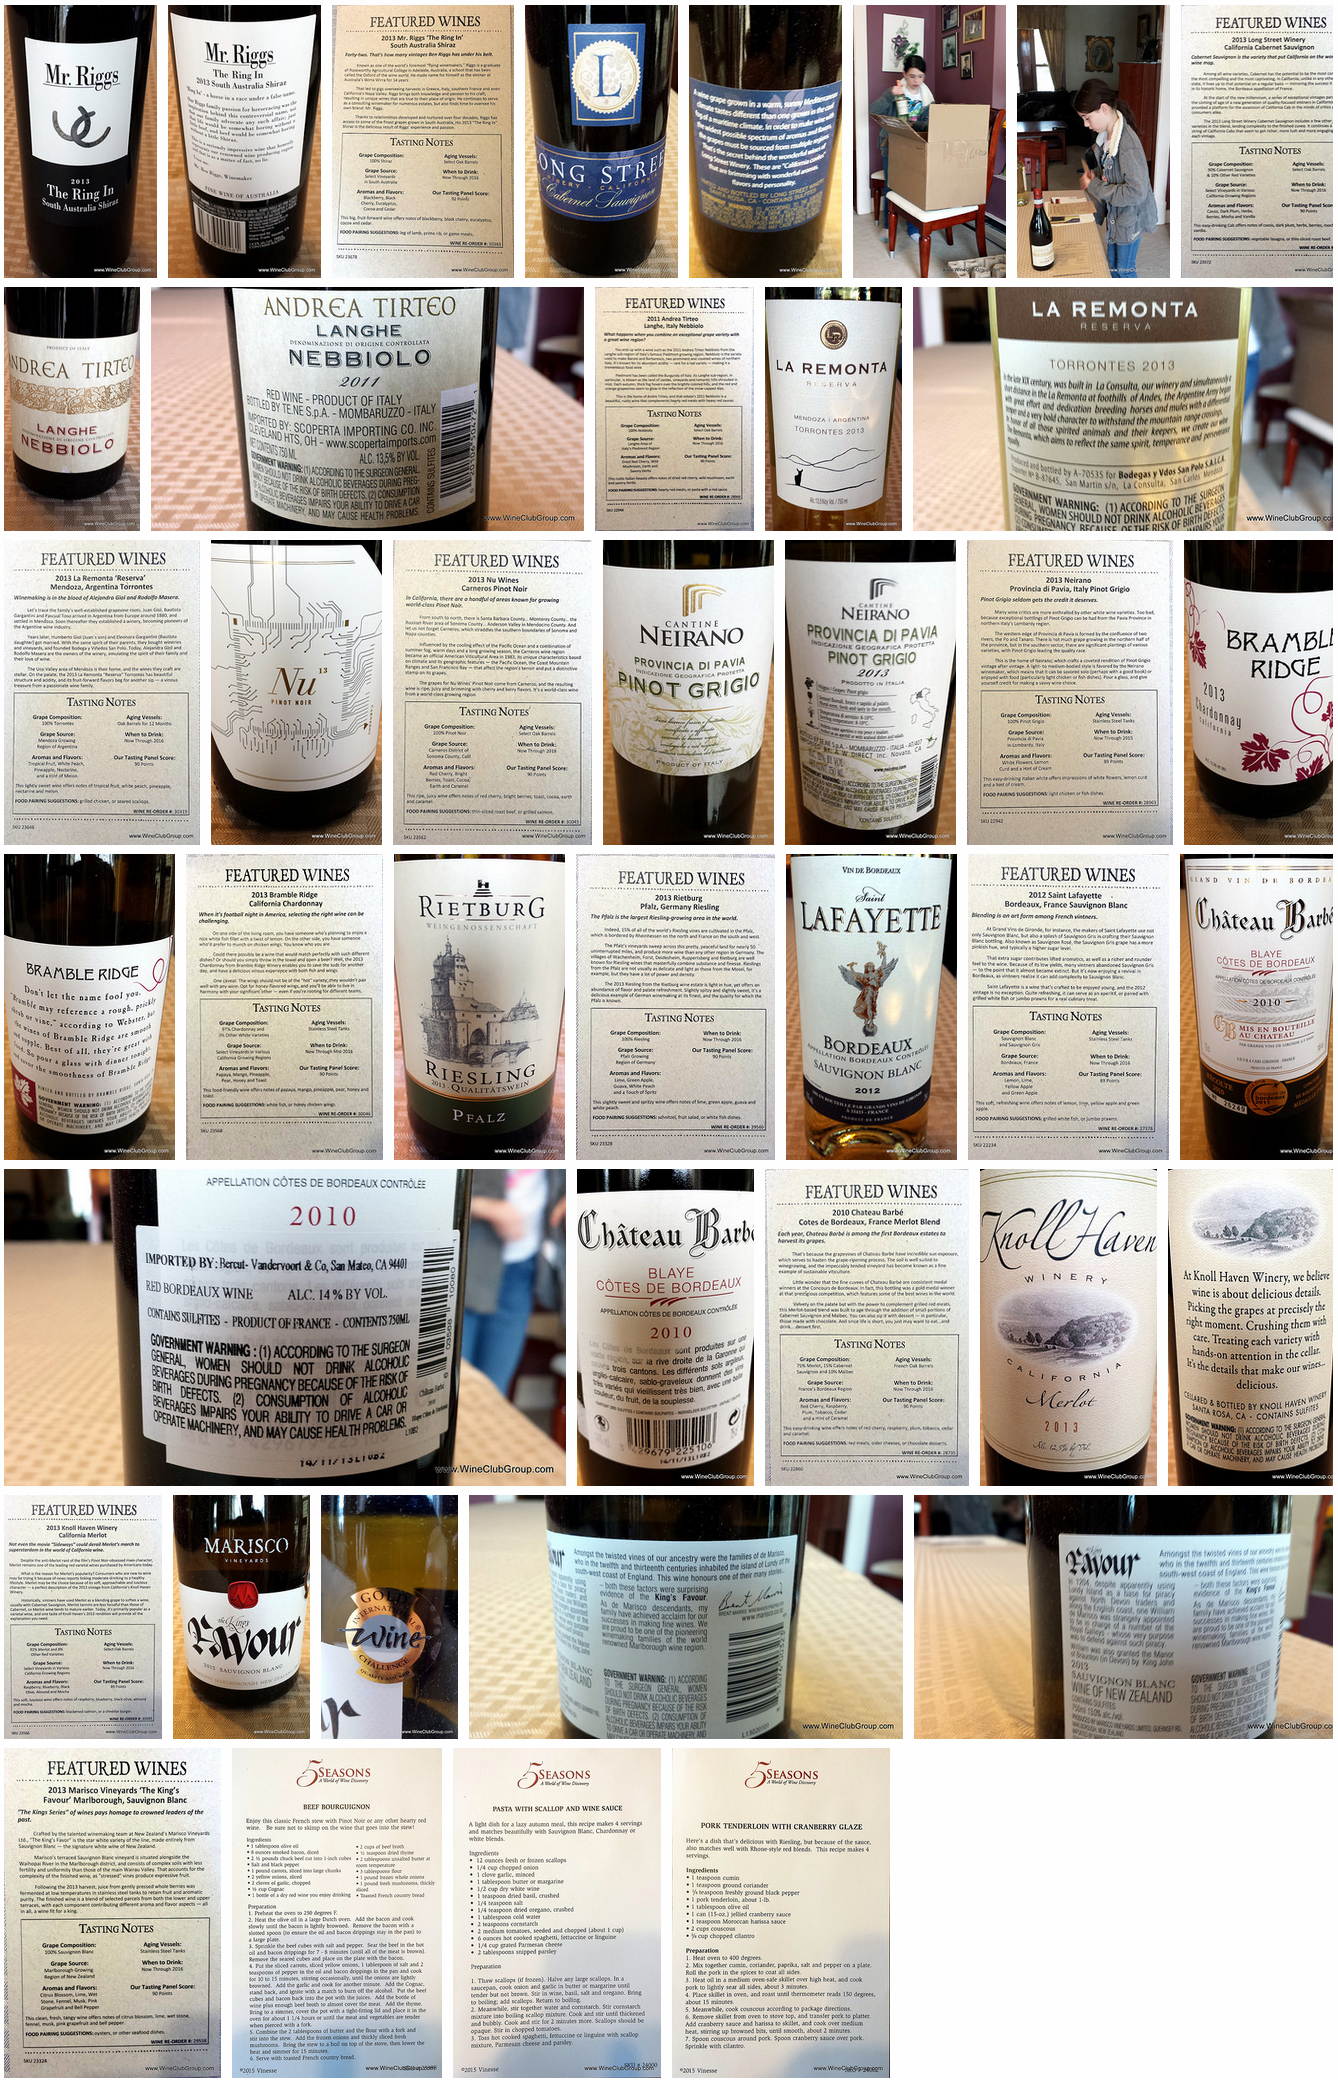 Direct Cellars – a New Wine Club Worth a Look